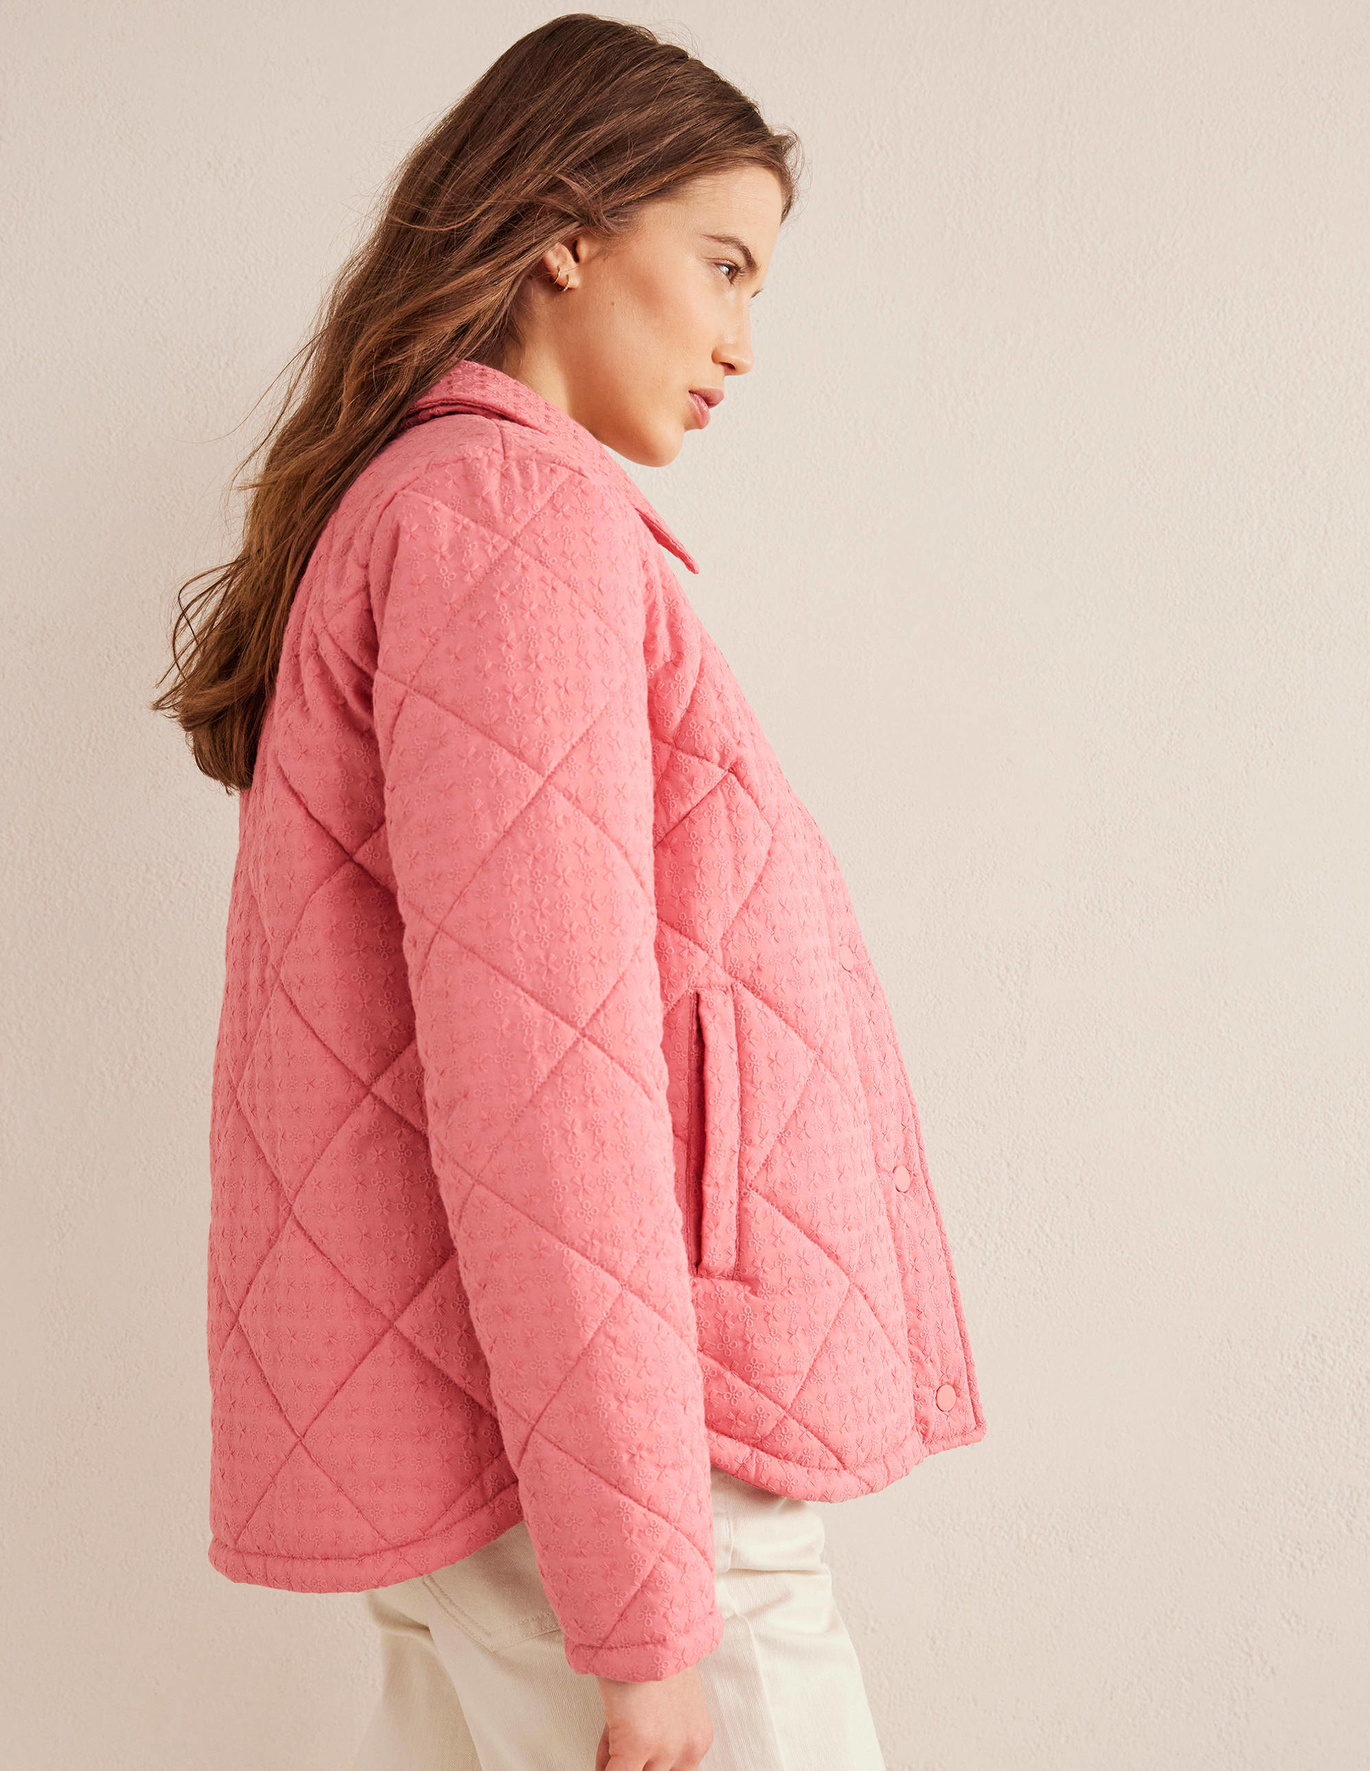 Boden Broderie Quilted Cotton Jacket - Pink